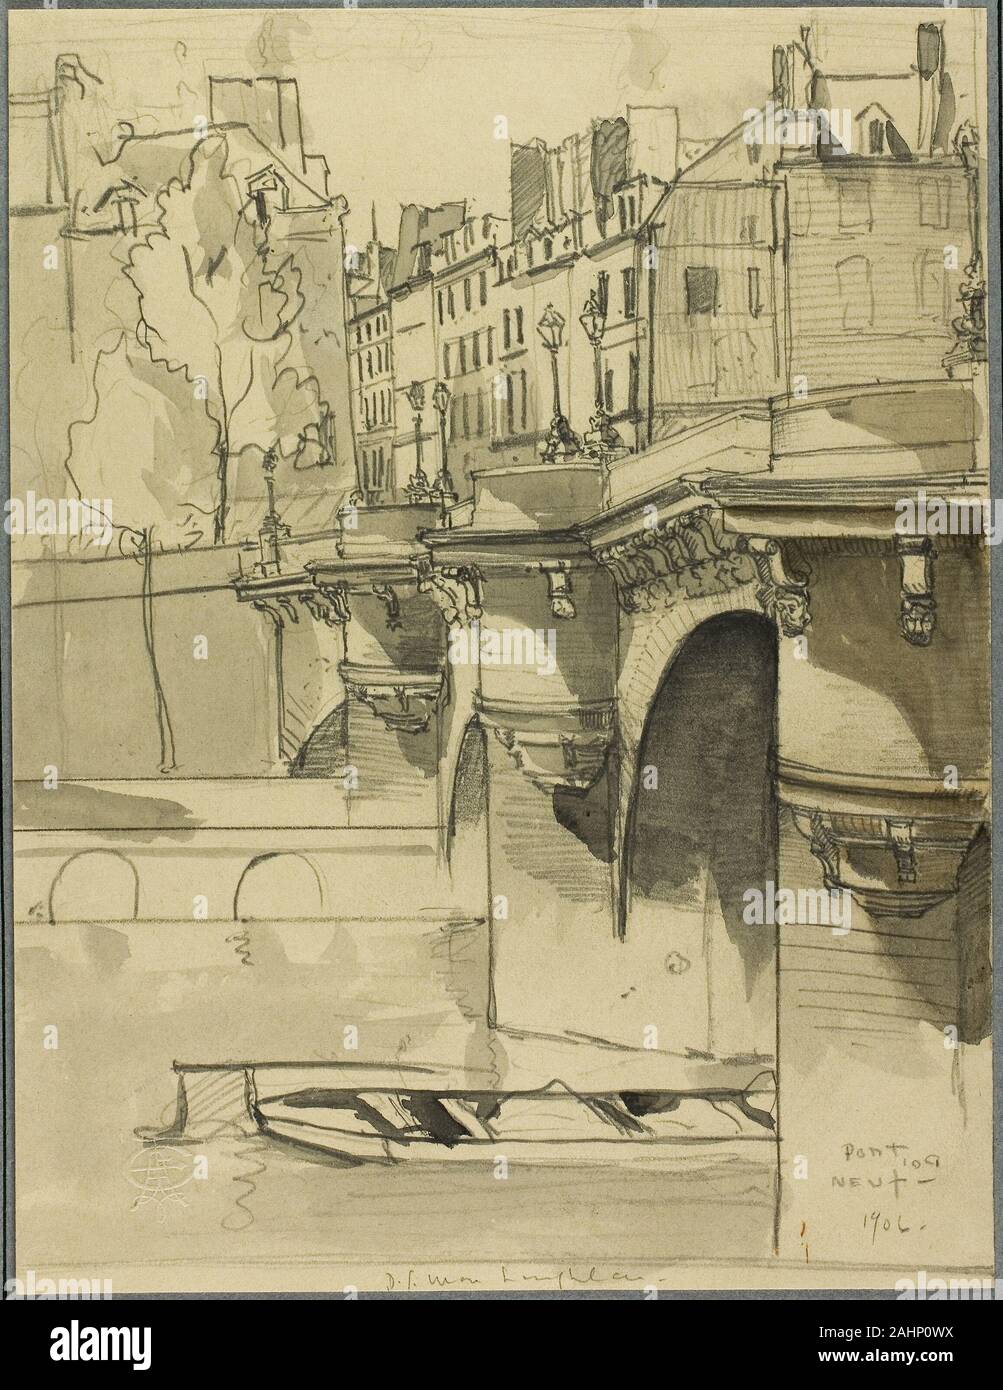 Donald Shaw MacLaughlan. View of the Pont Neuf. 1906. United States. Graphite with brush and gray and brown wash, on cream wove paper, hinged onto blue wove card Stock Photo